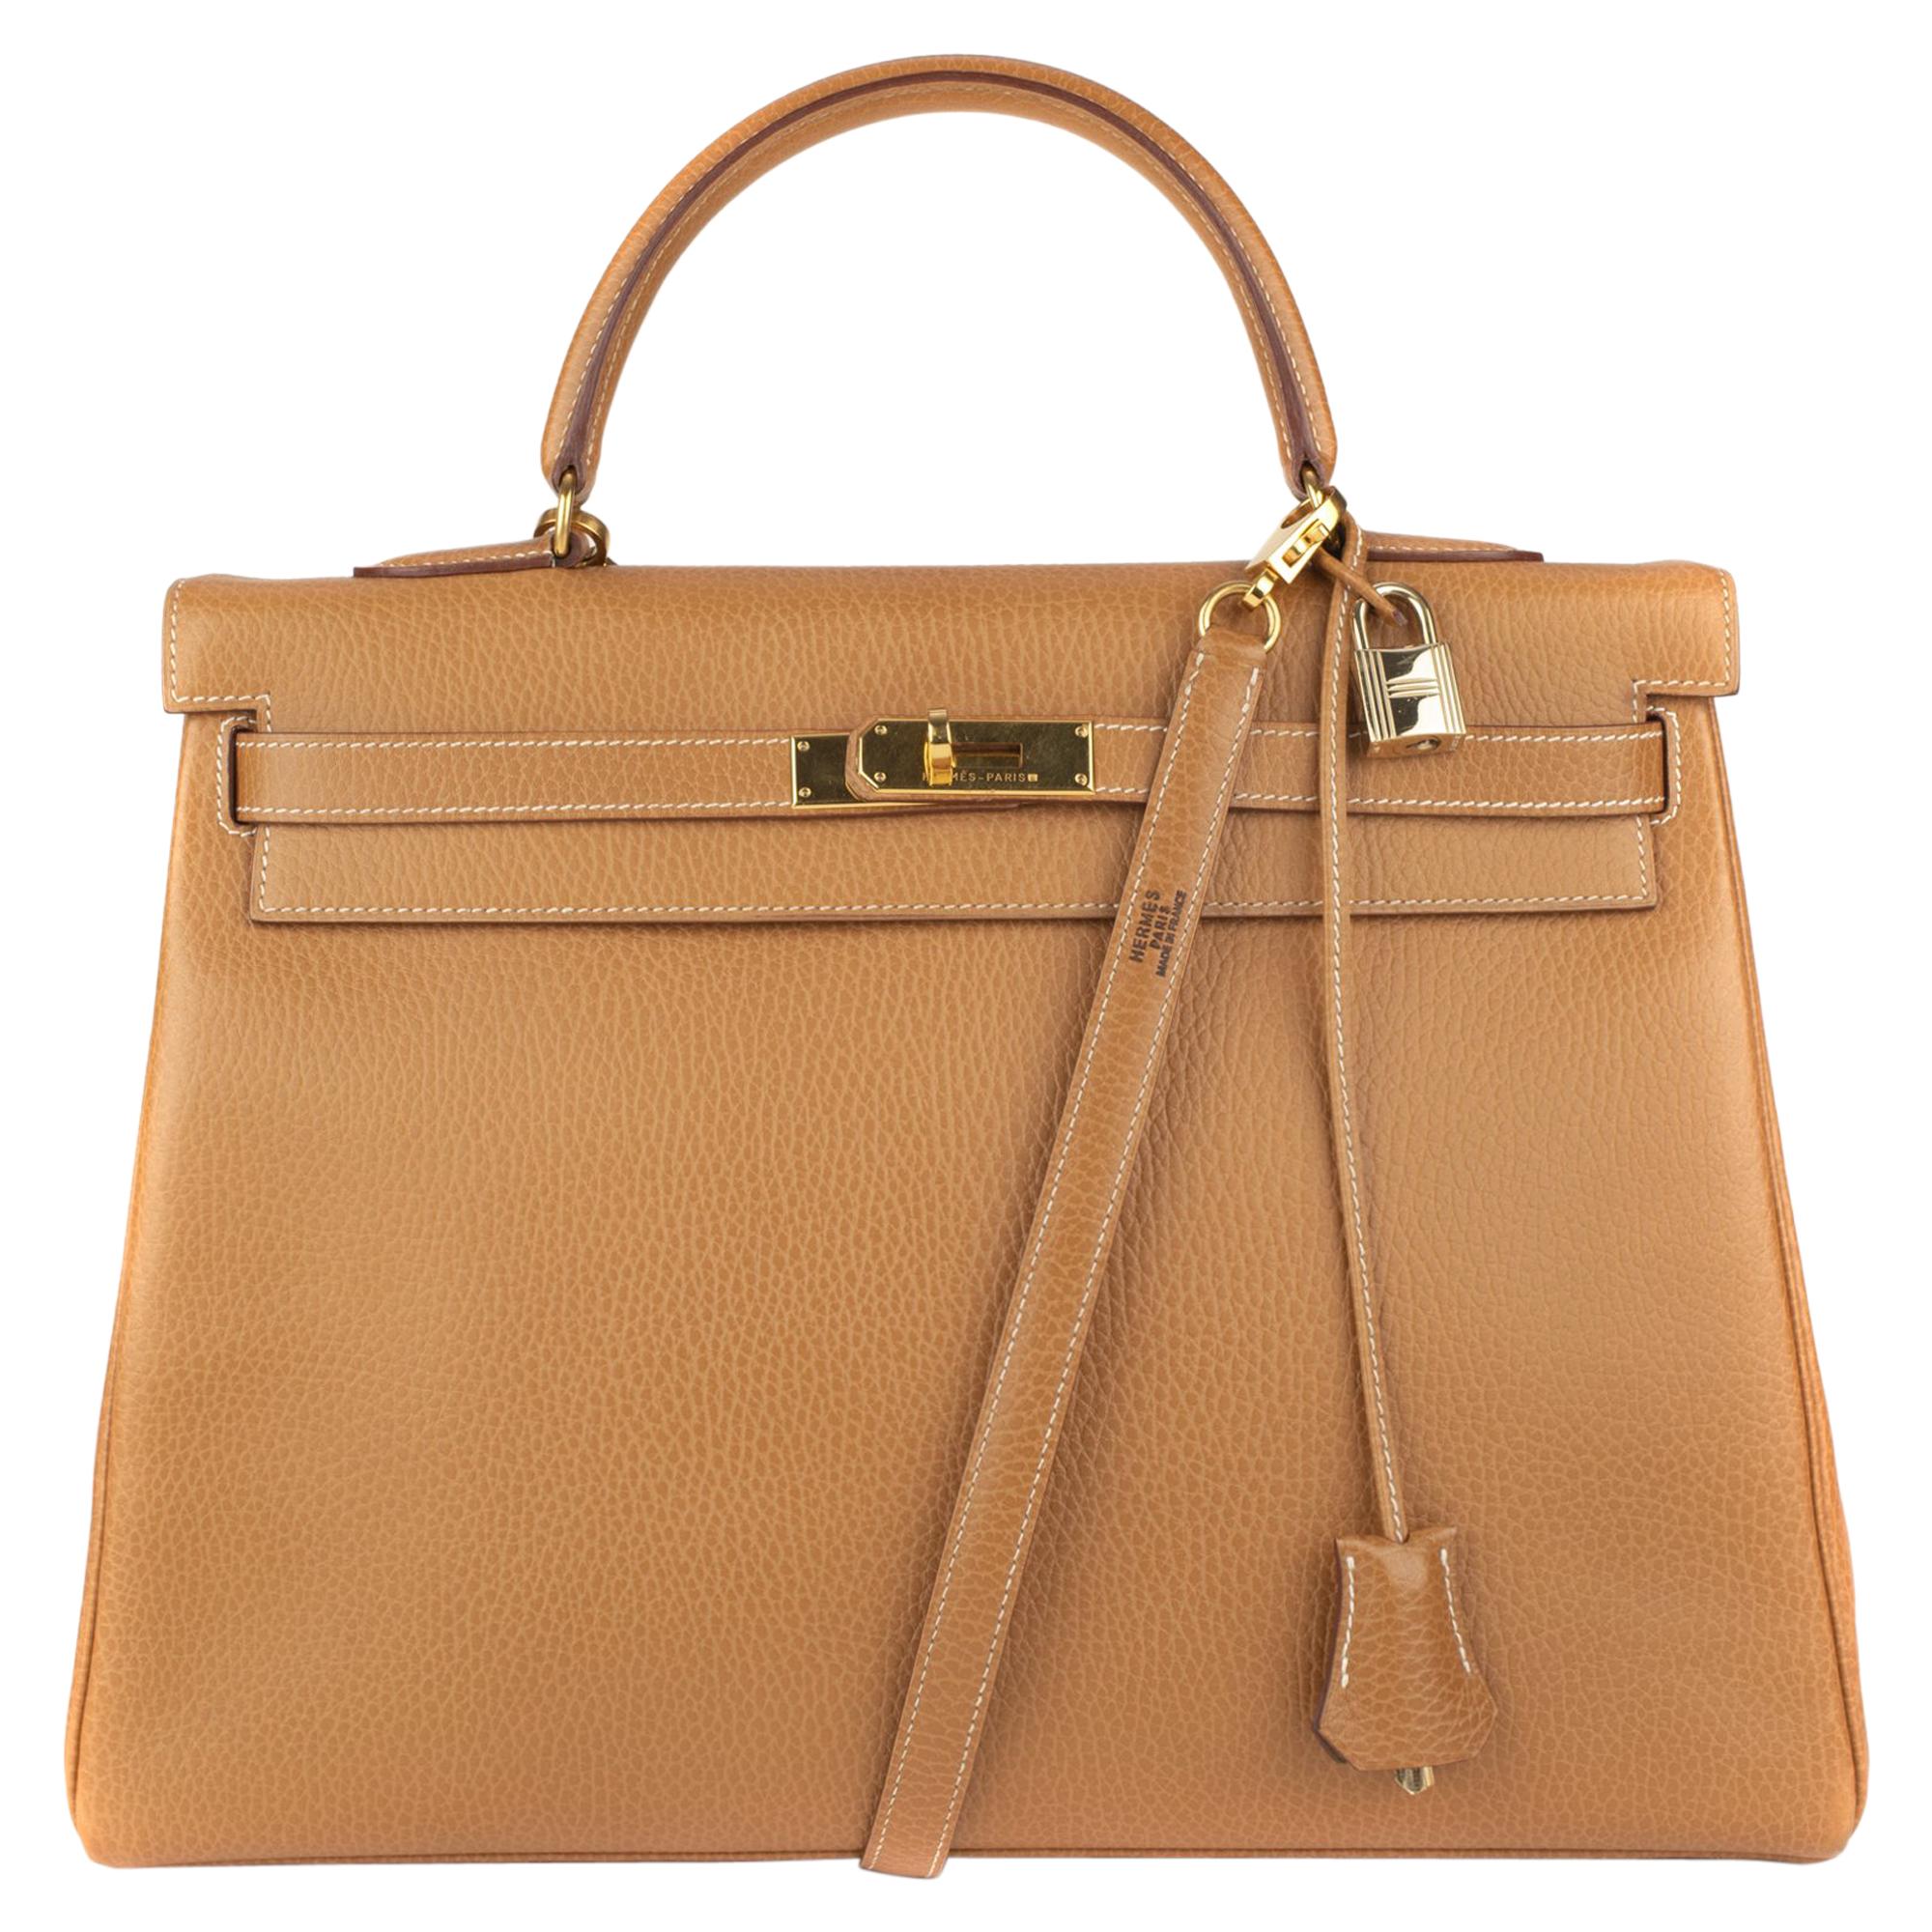 Handbag Hermes Kelly 35 in Gold Ardennes Leather, GHW, optimal condition !